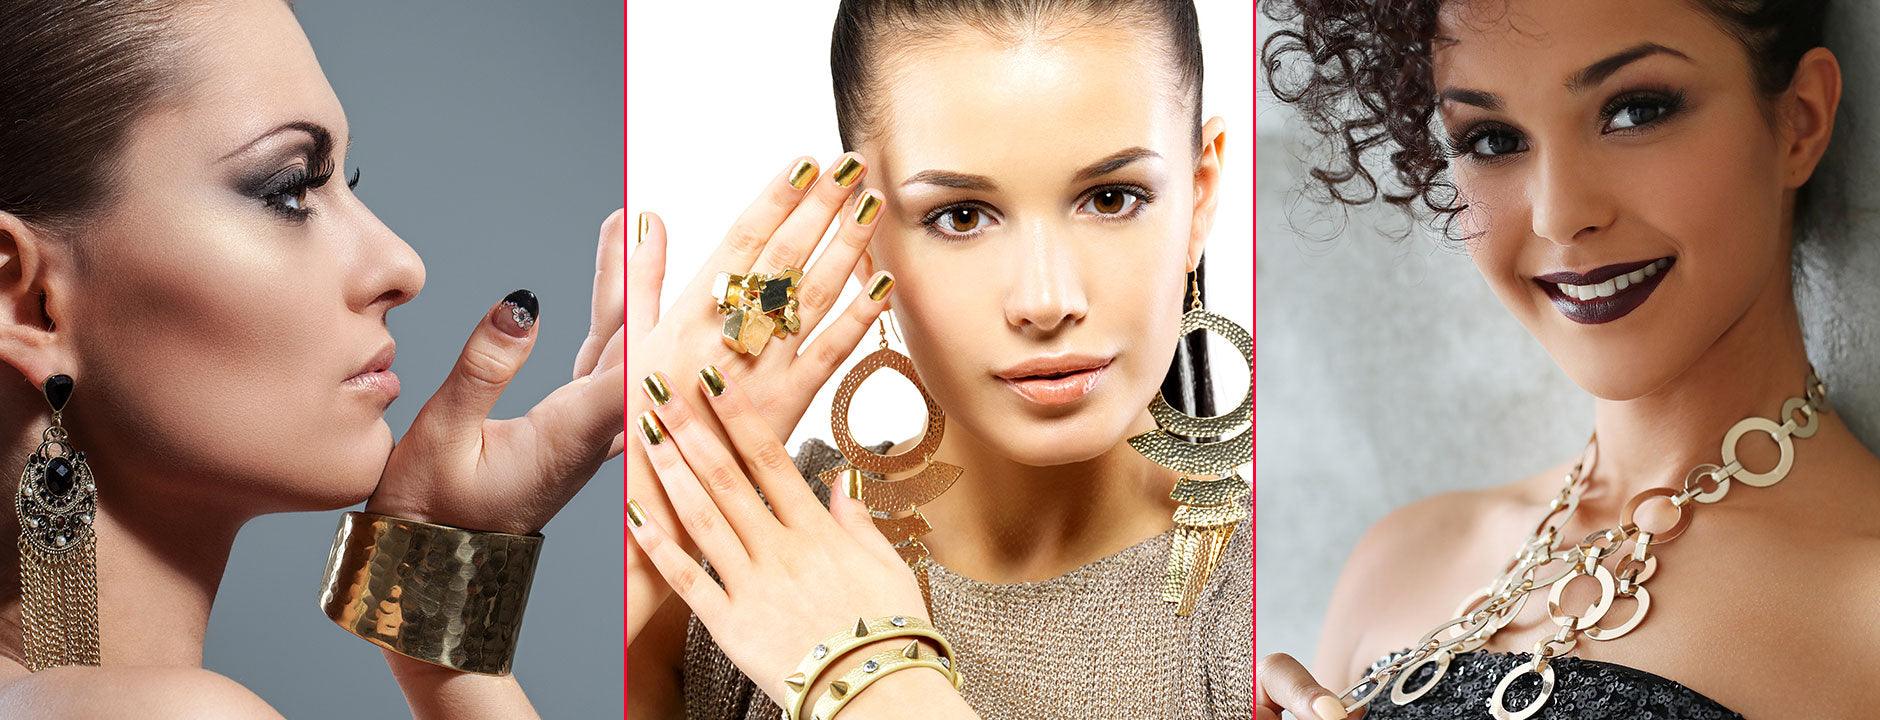 Buy Jewelry & Beauty Products Online at Discounted Rates - Daily Fashion